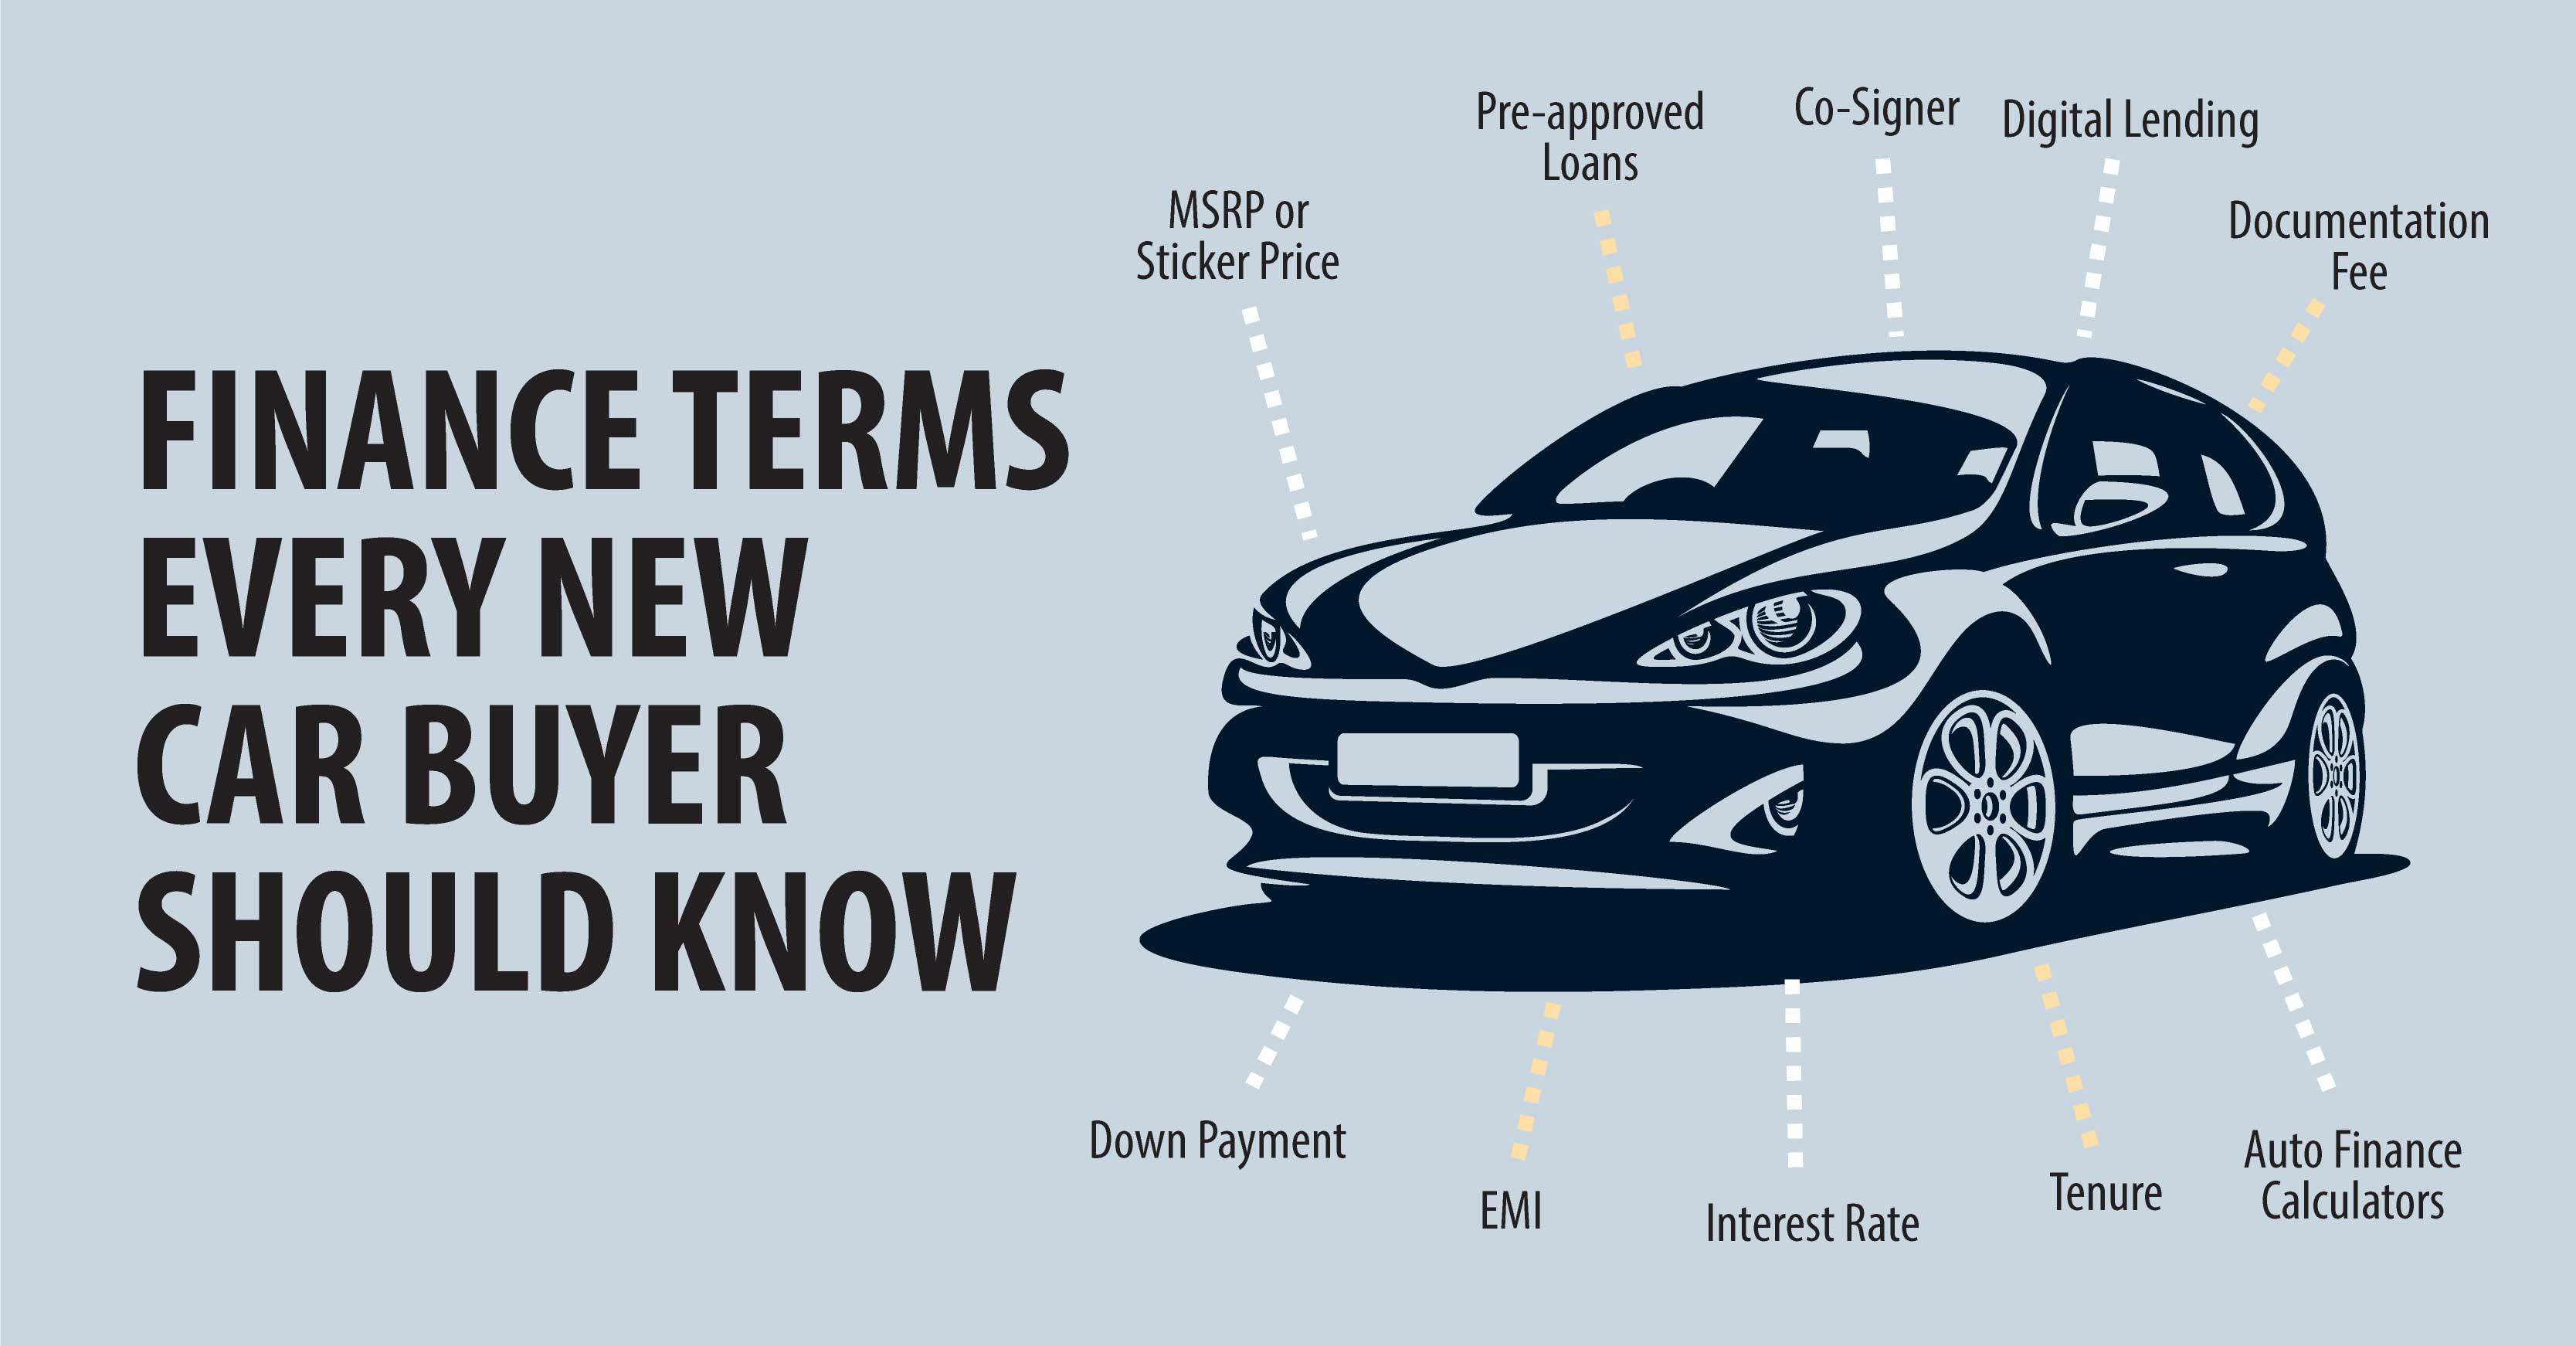 FINANCE TERMS EVERY NEW CAR BUYER SHOULD KNOW